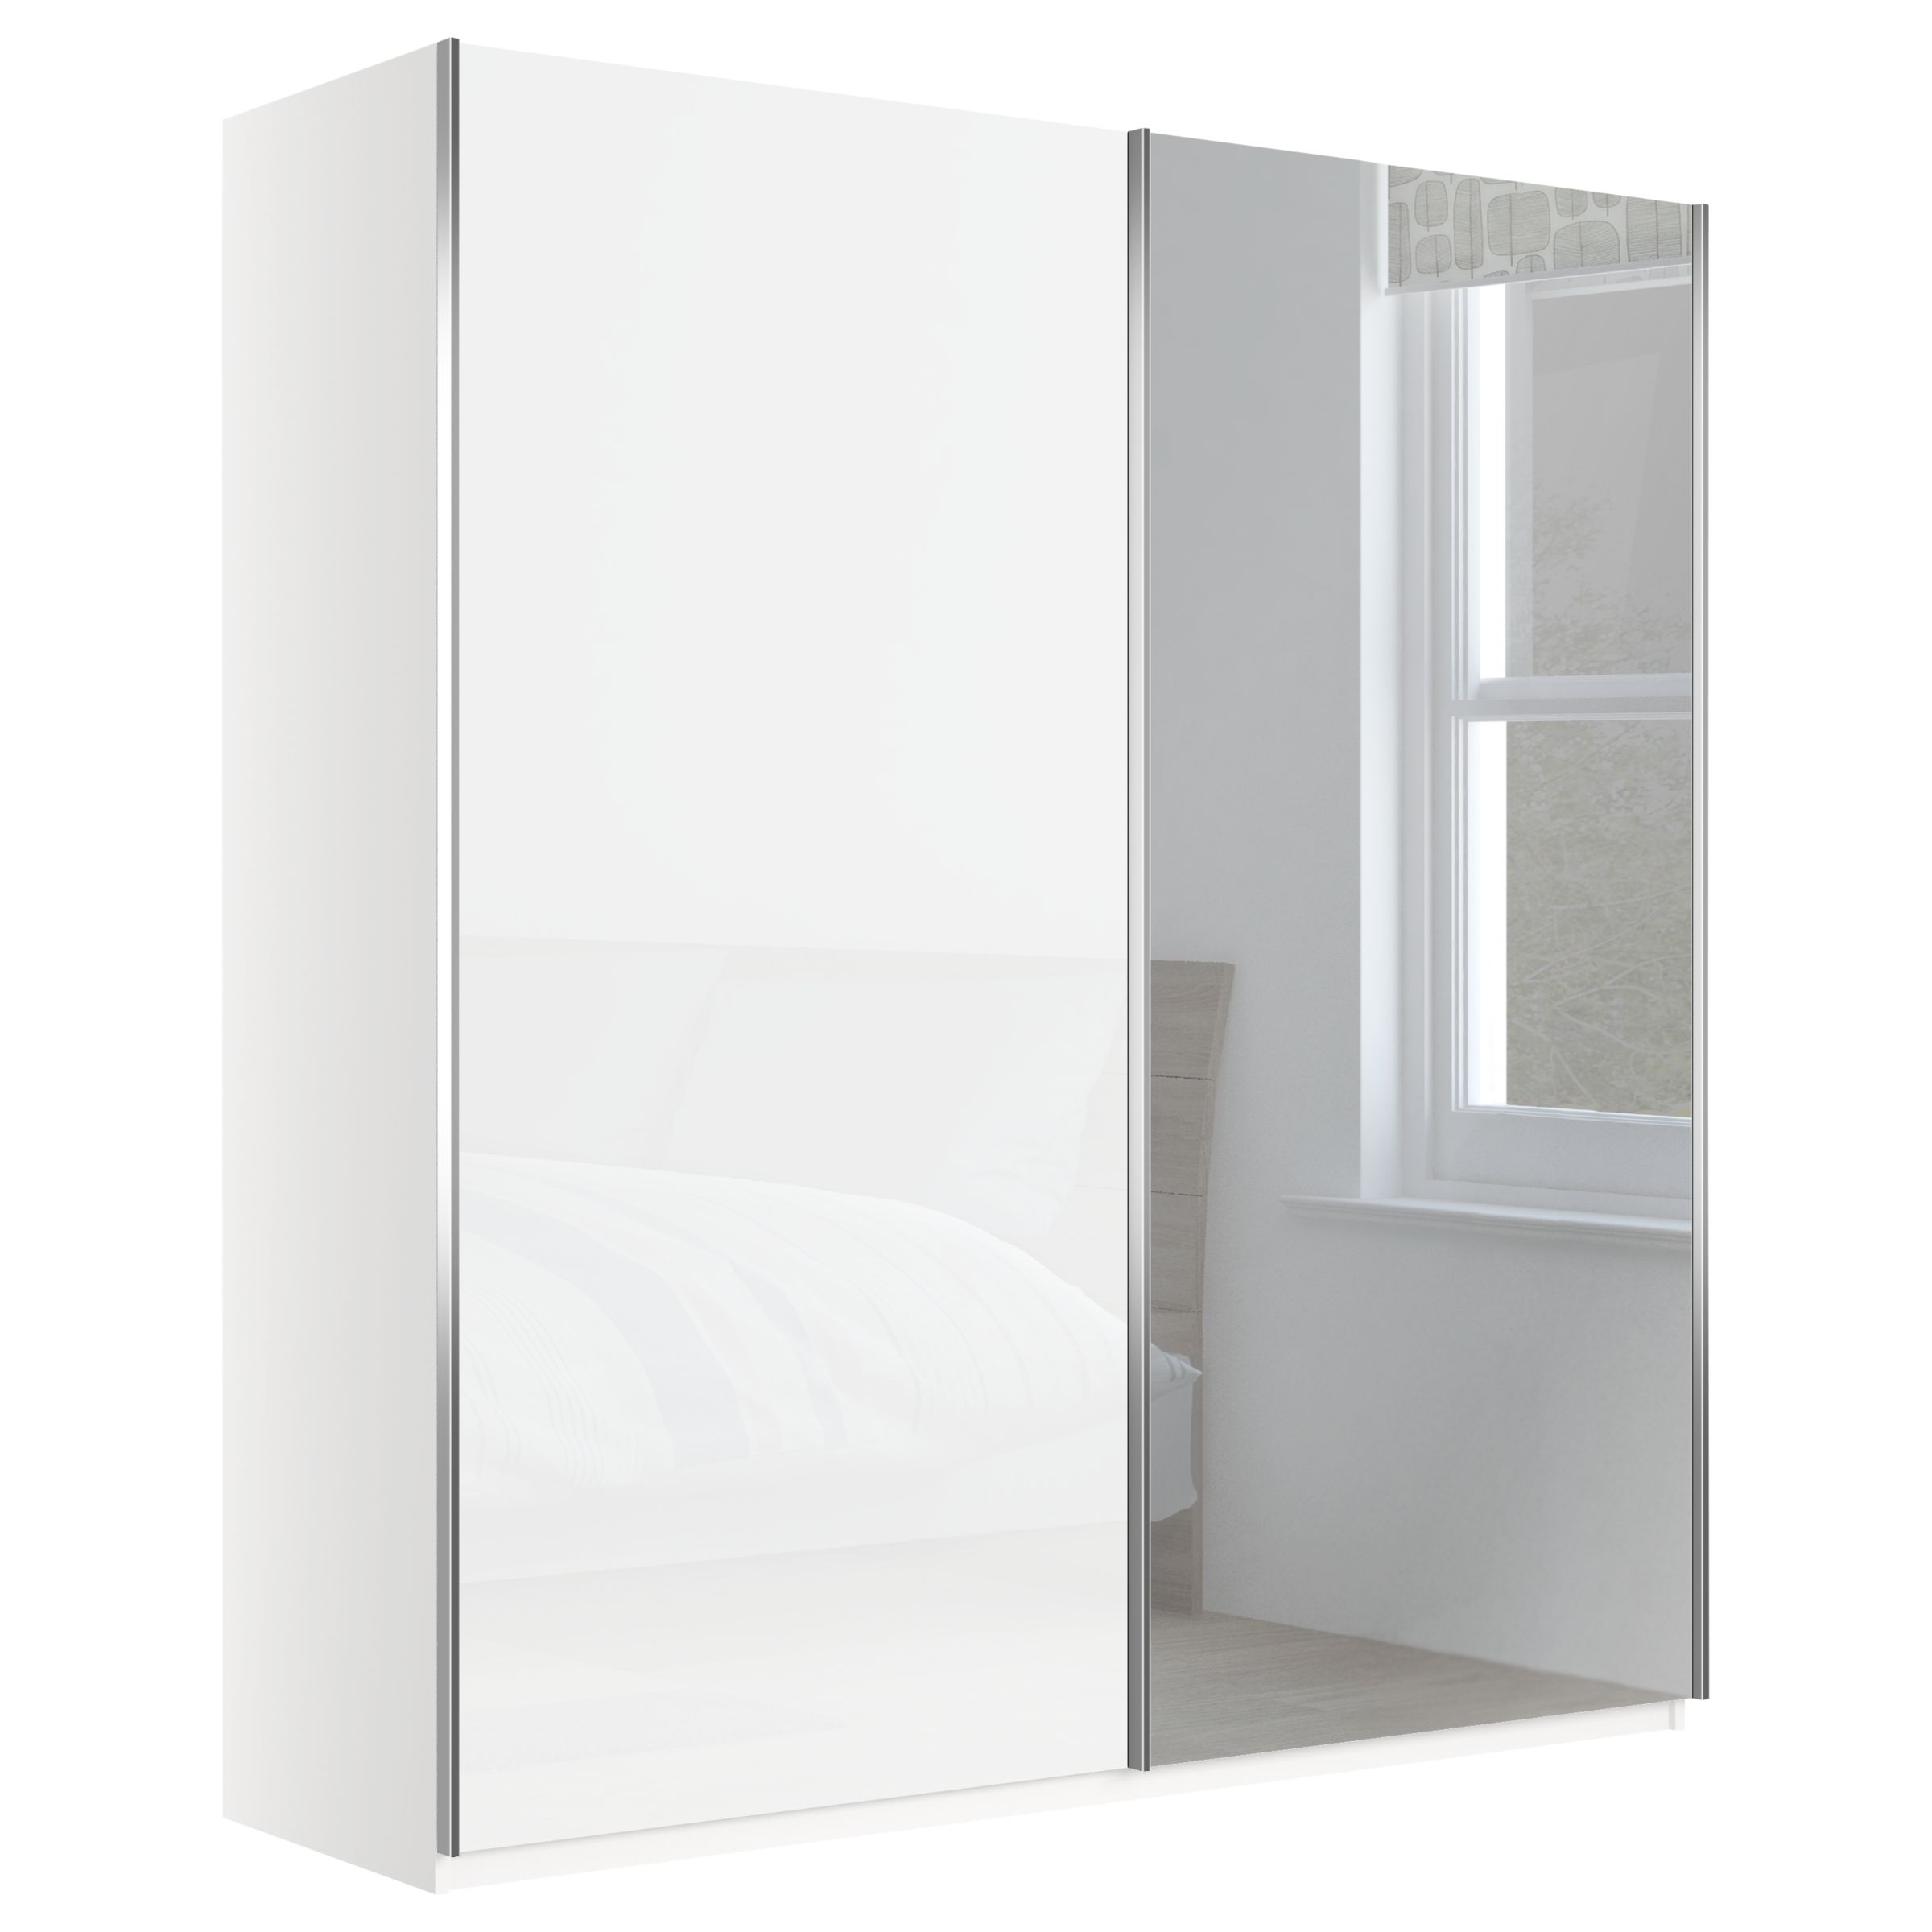 Photo of John lewis elstra 200cm wardrobe with glass and mirrored sliding doors